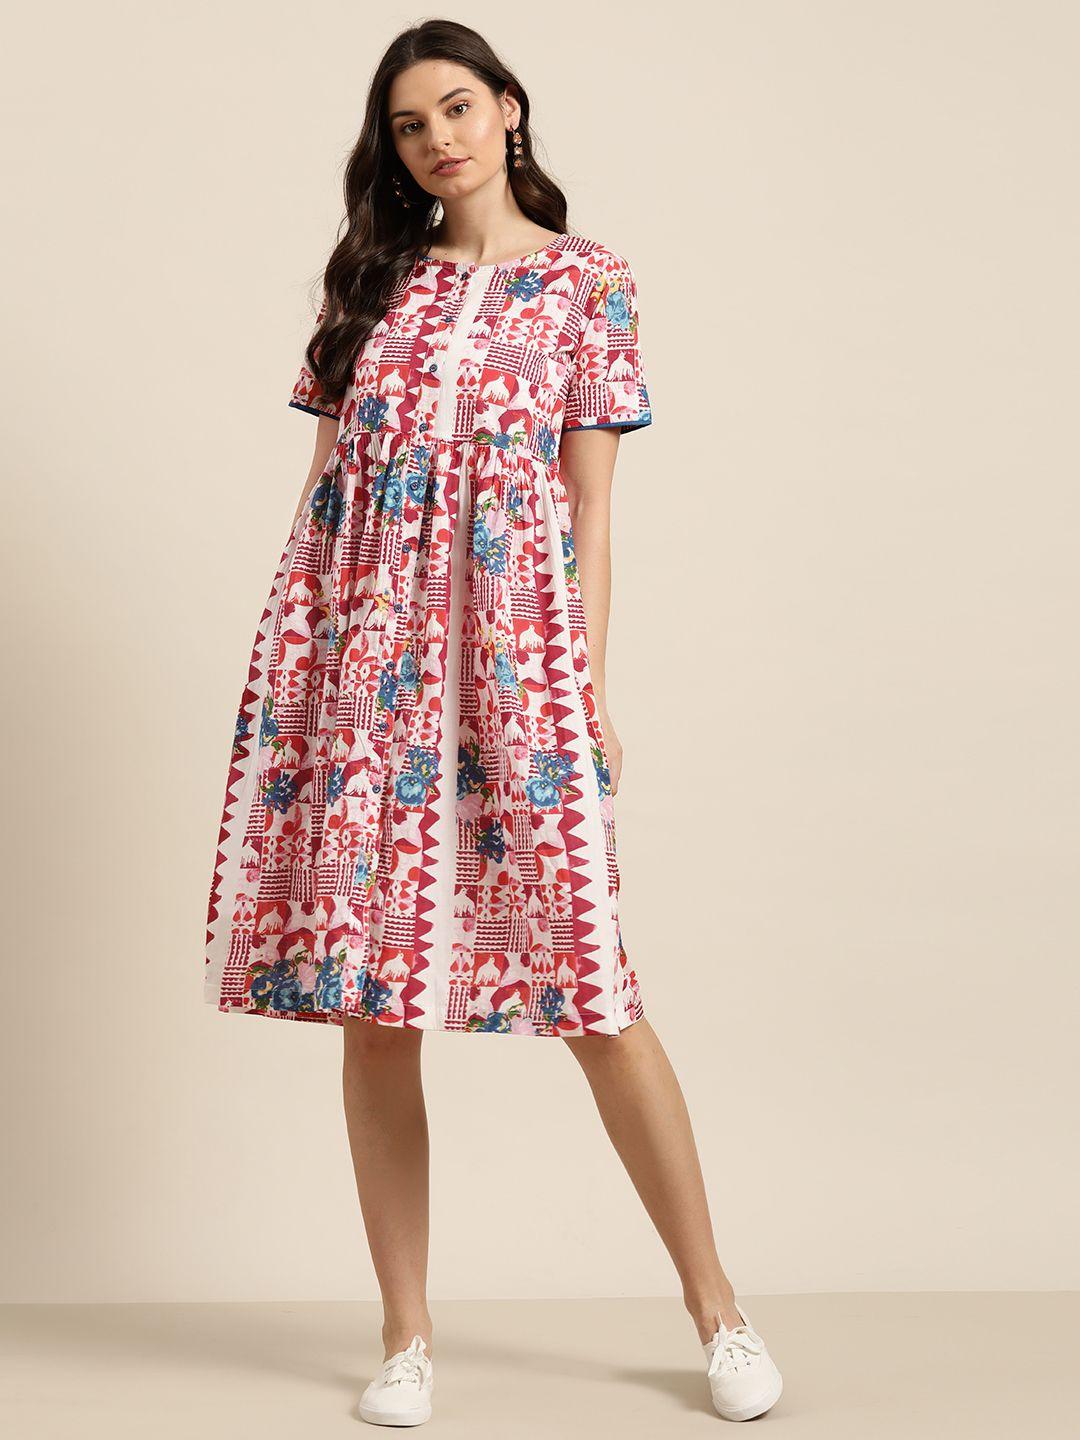 sangria women off-white & red pure cotton printed a-line dress